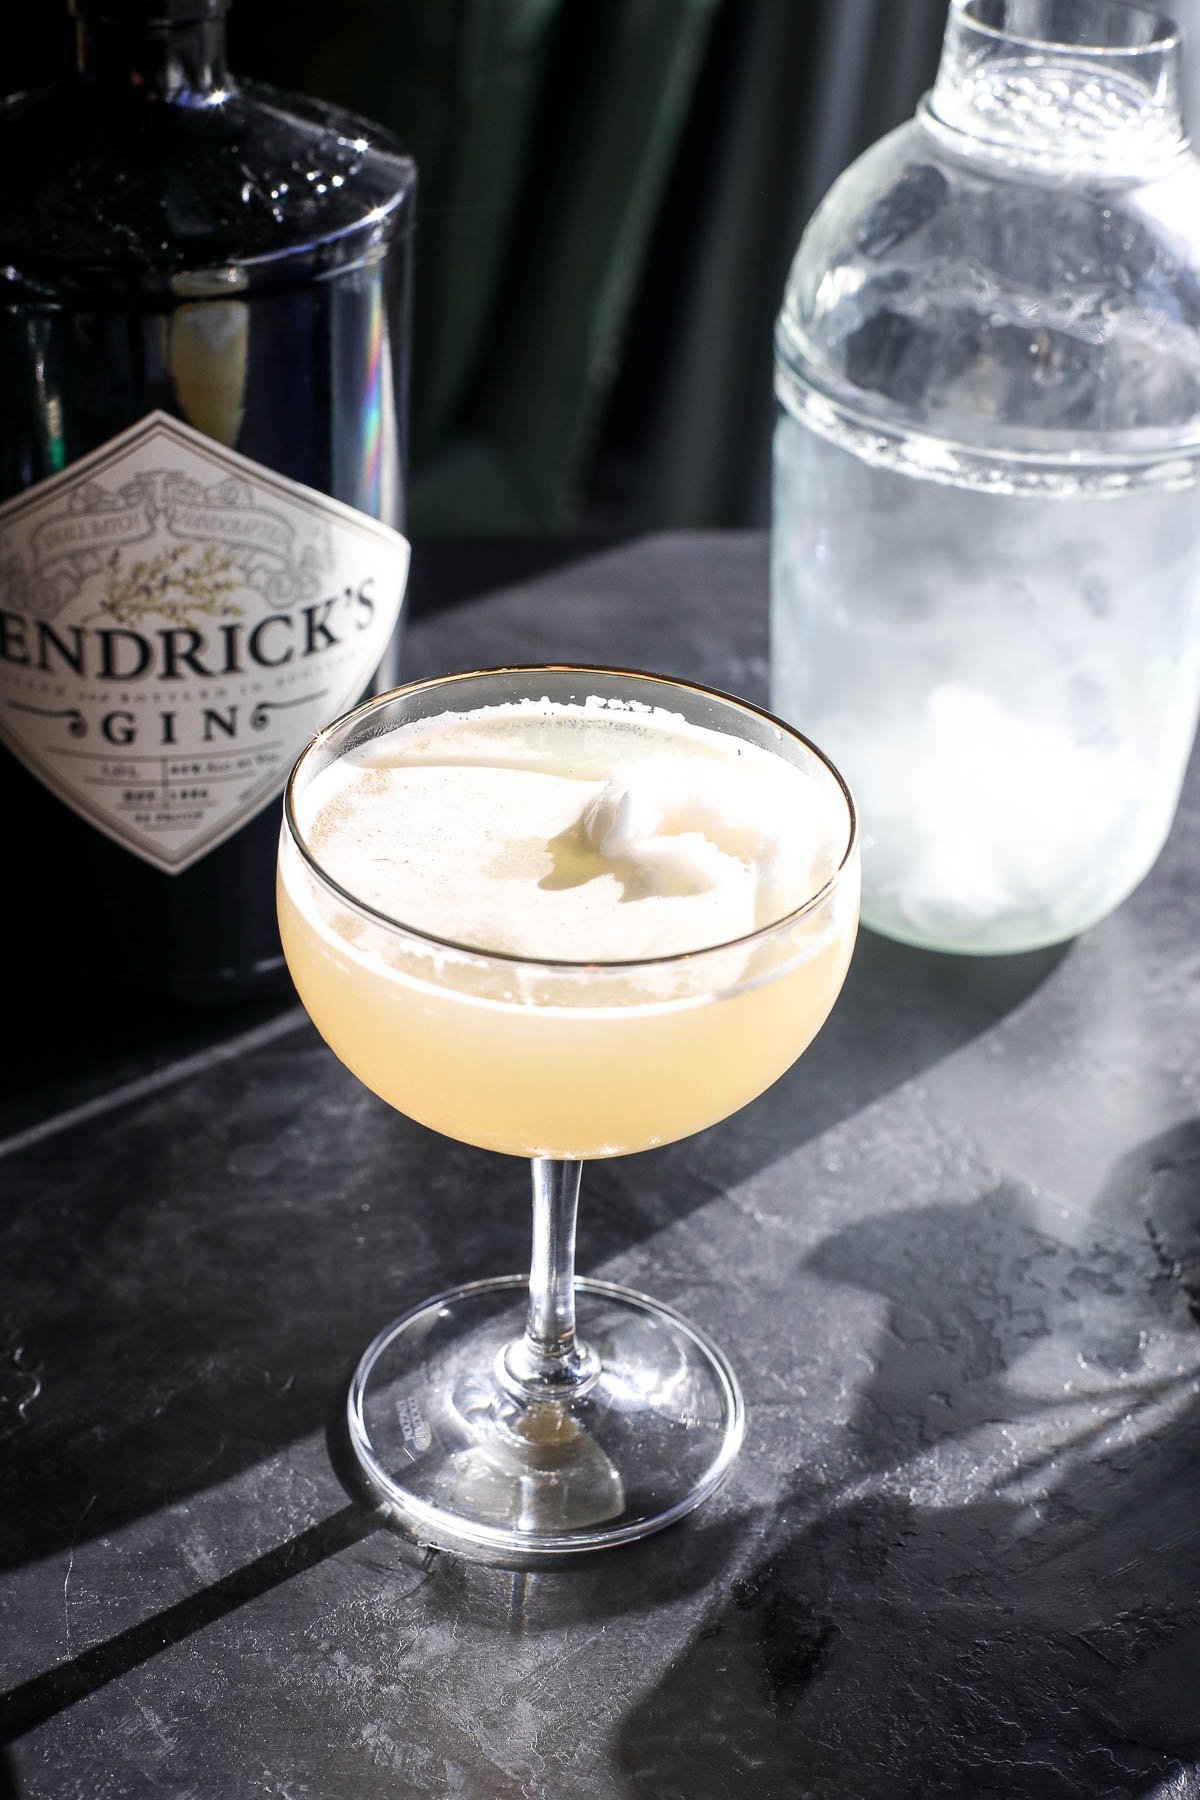 Discover the perfect summer refreshment: Bee's Knees with gin and lemon sorbet. Zesty, sweet, and oh-so-satisfying!